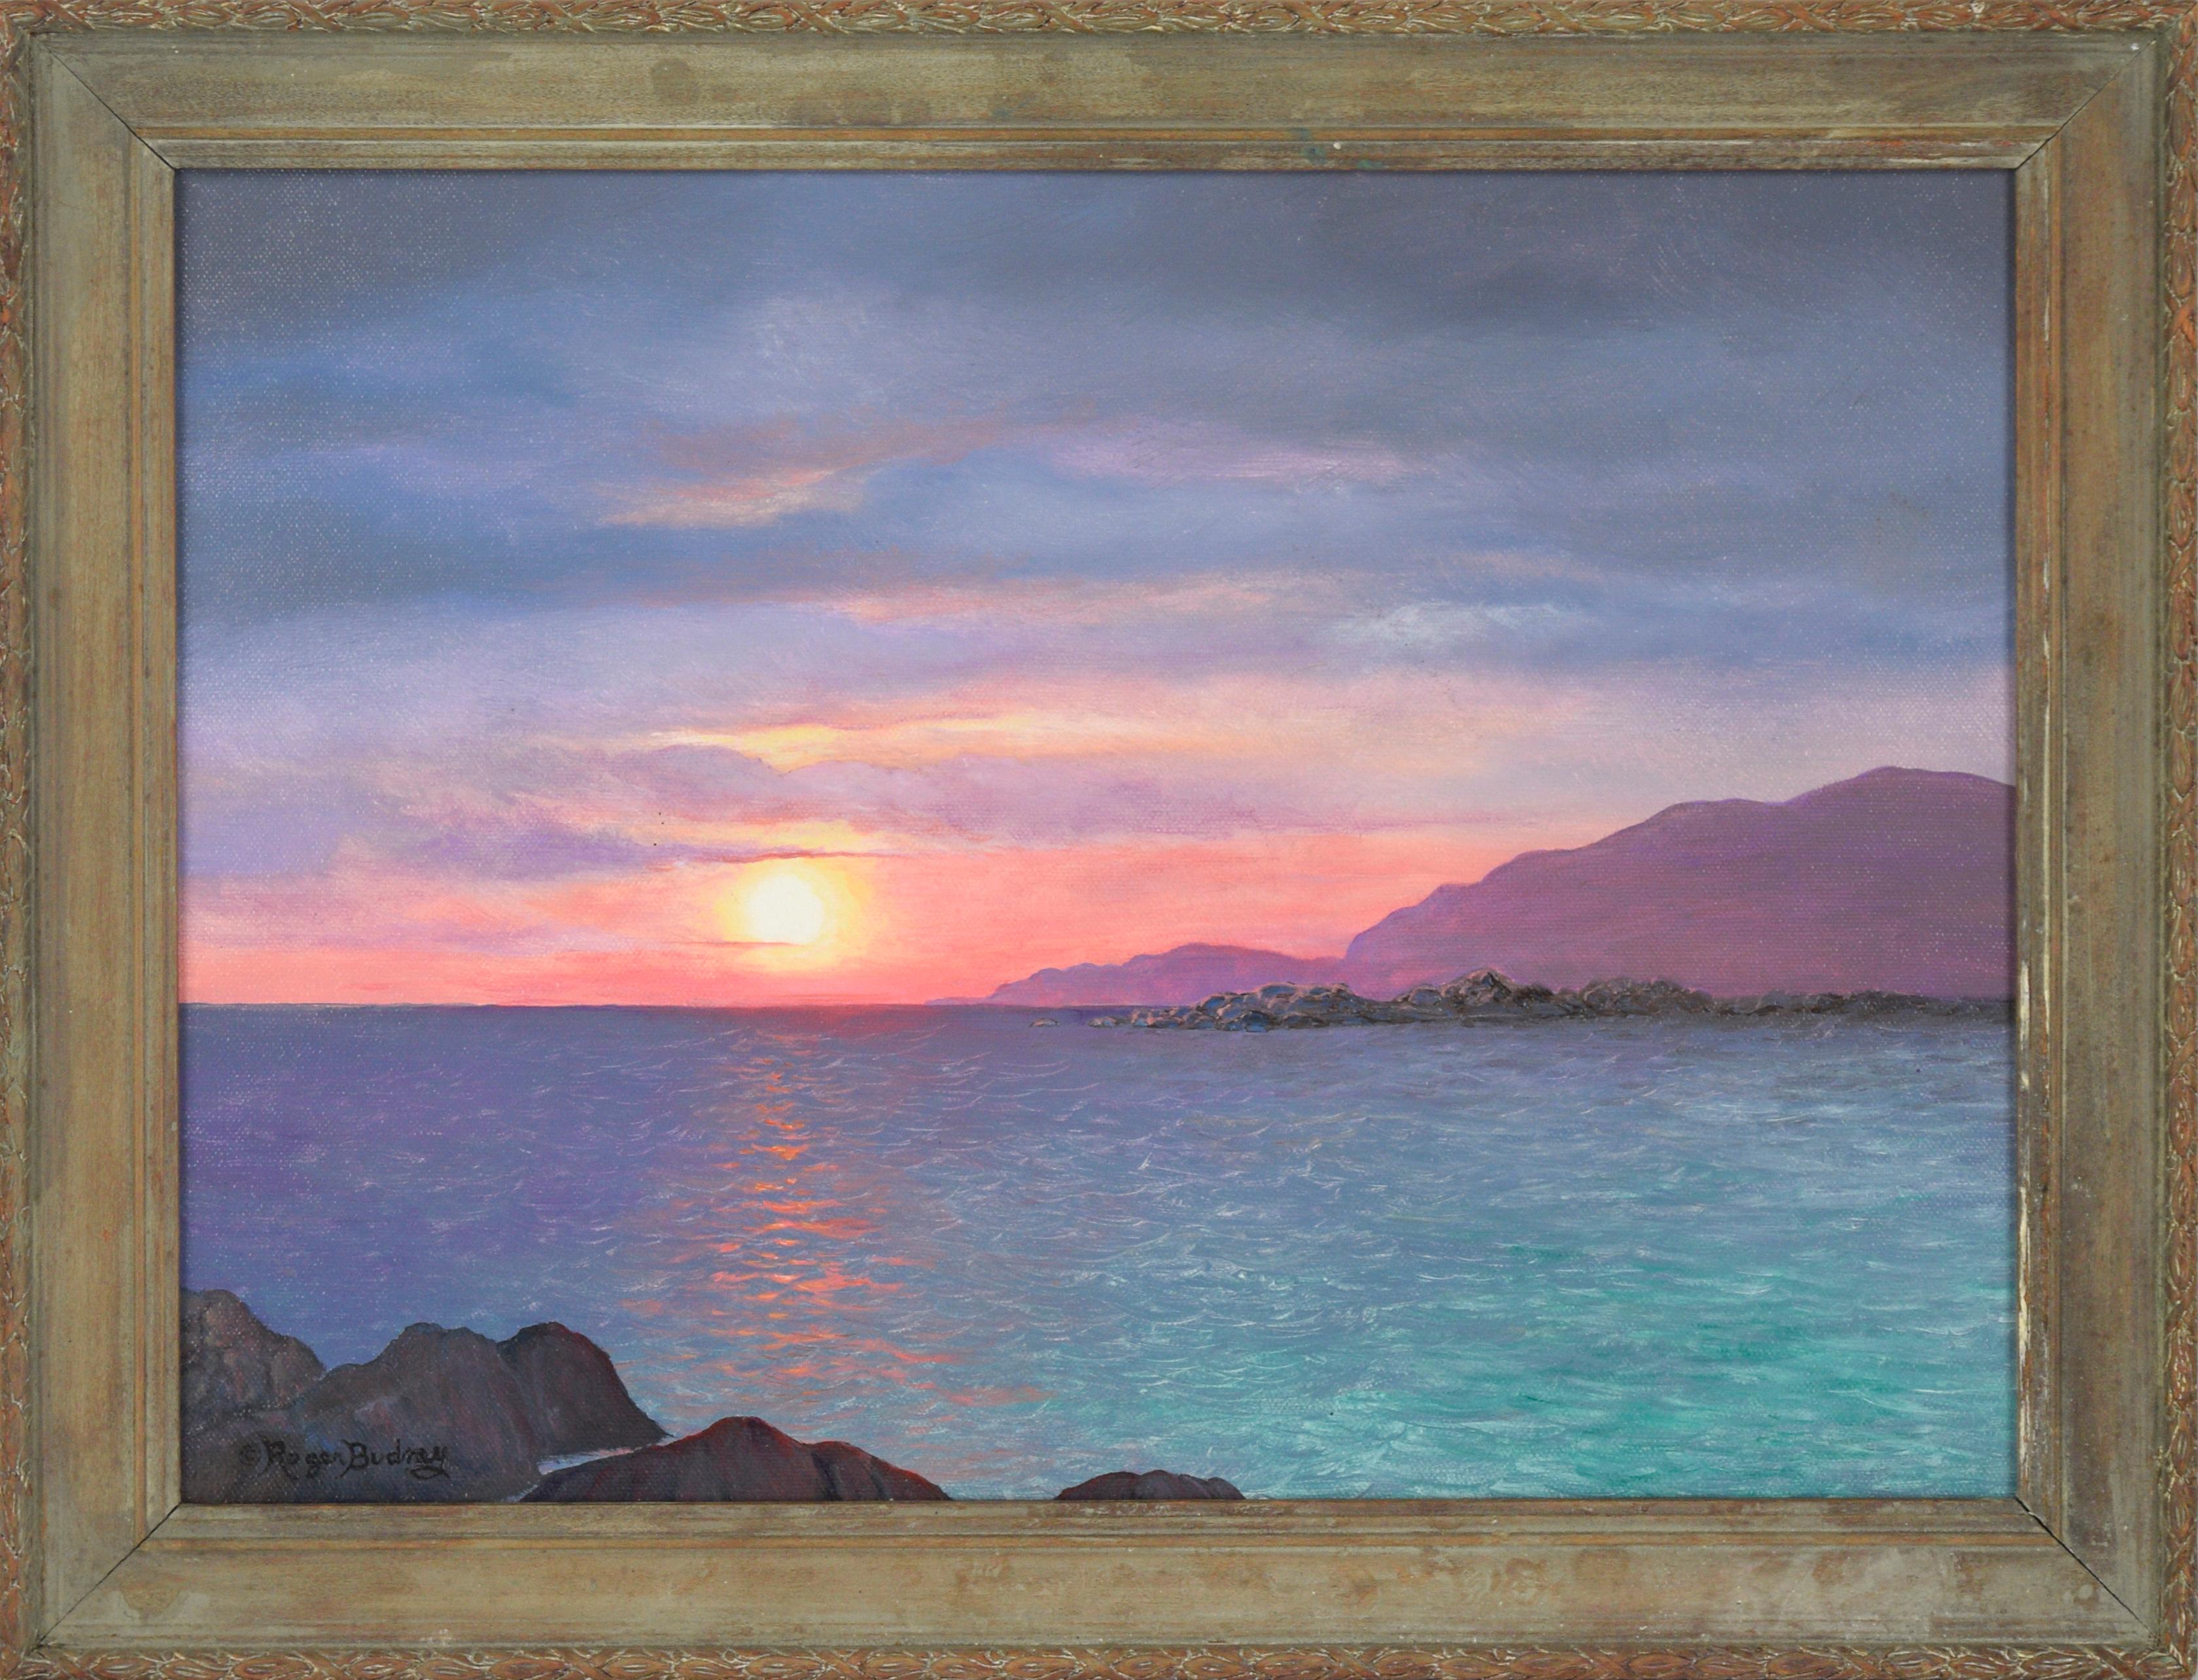 Roger Budney Landscape Painting - "El Pacifico" Pink Sunset Over the Ocean